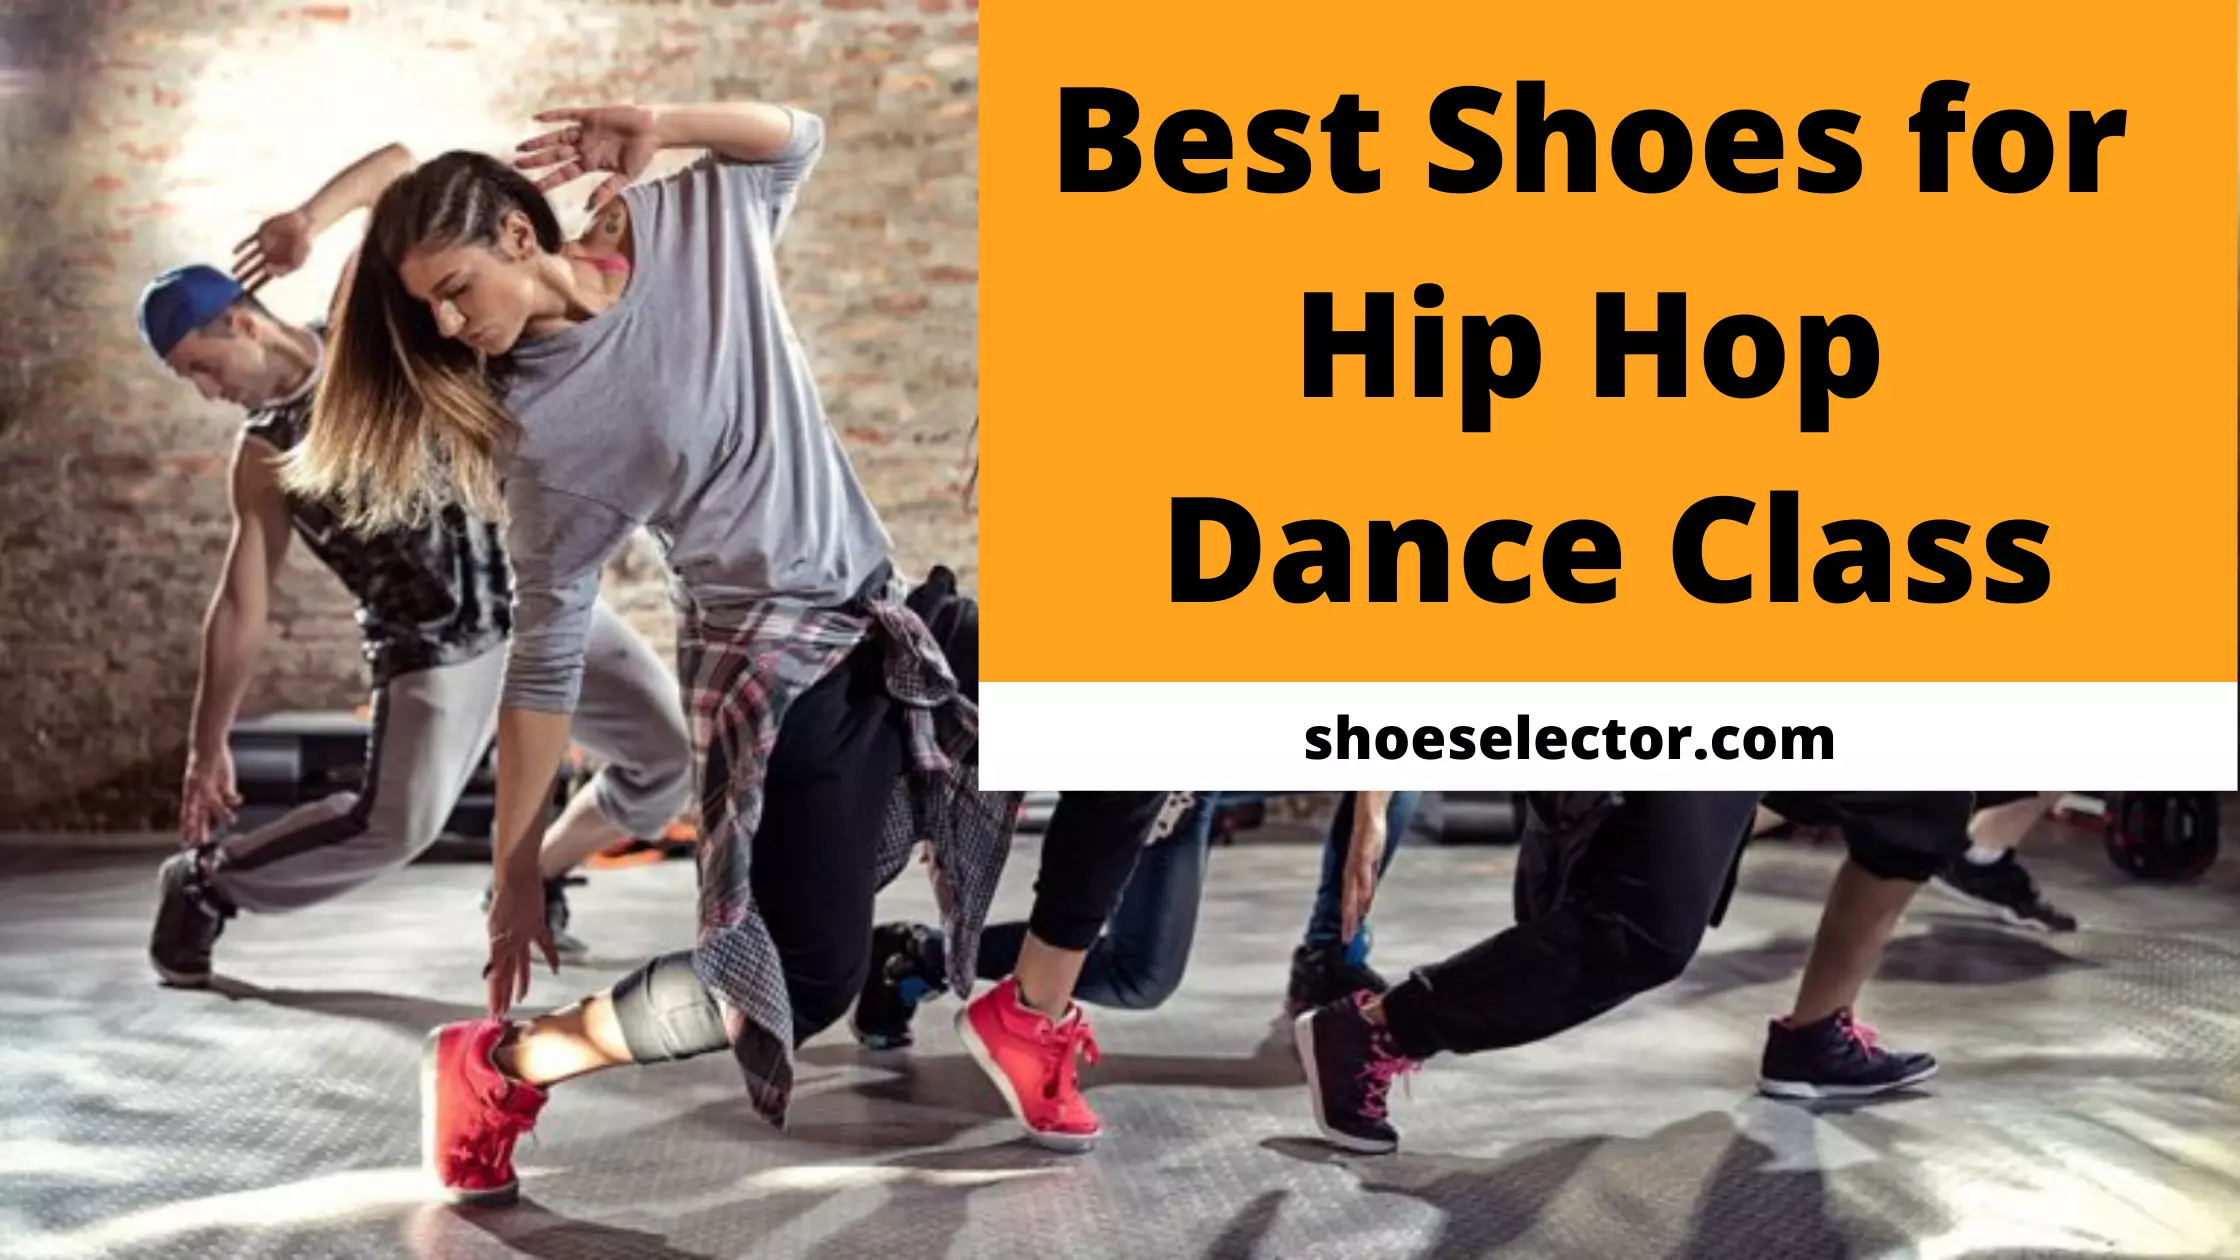 Best Shoes For Hip Hop Dance Class - Supportive And Stylish